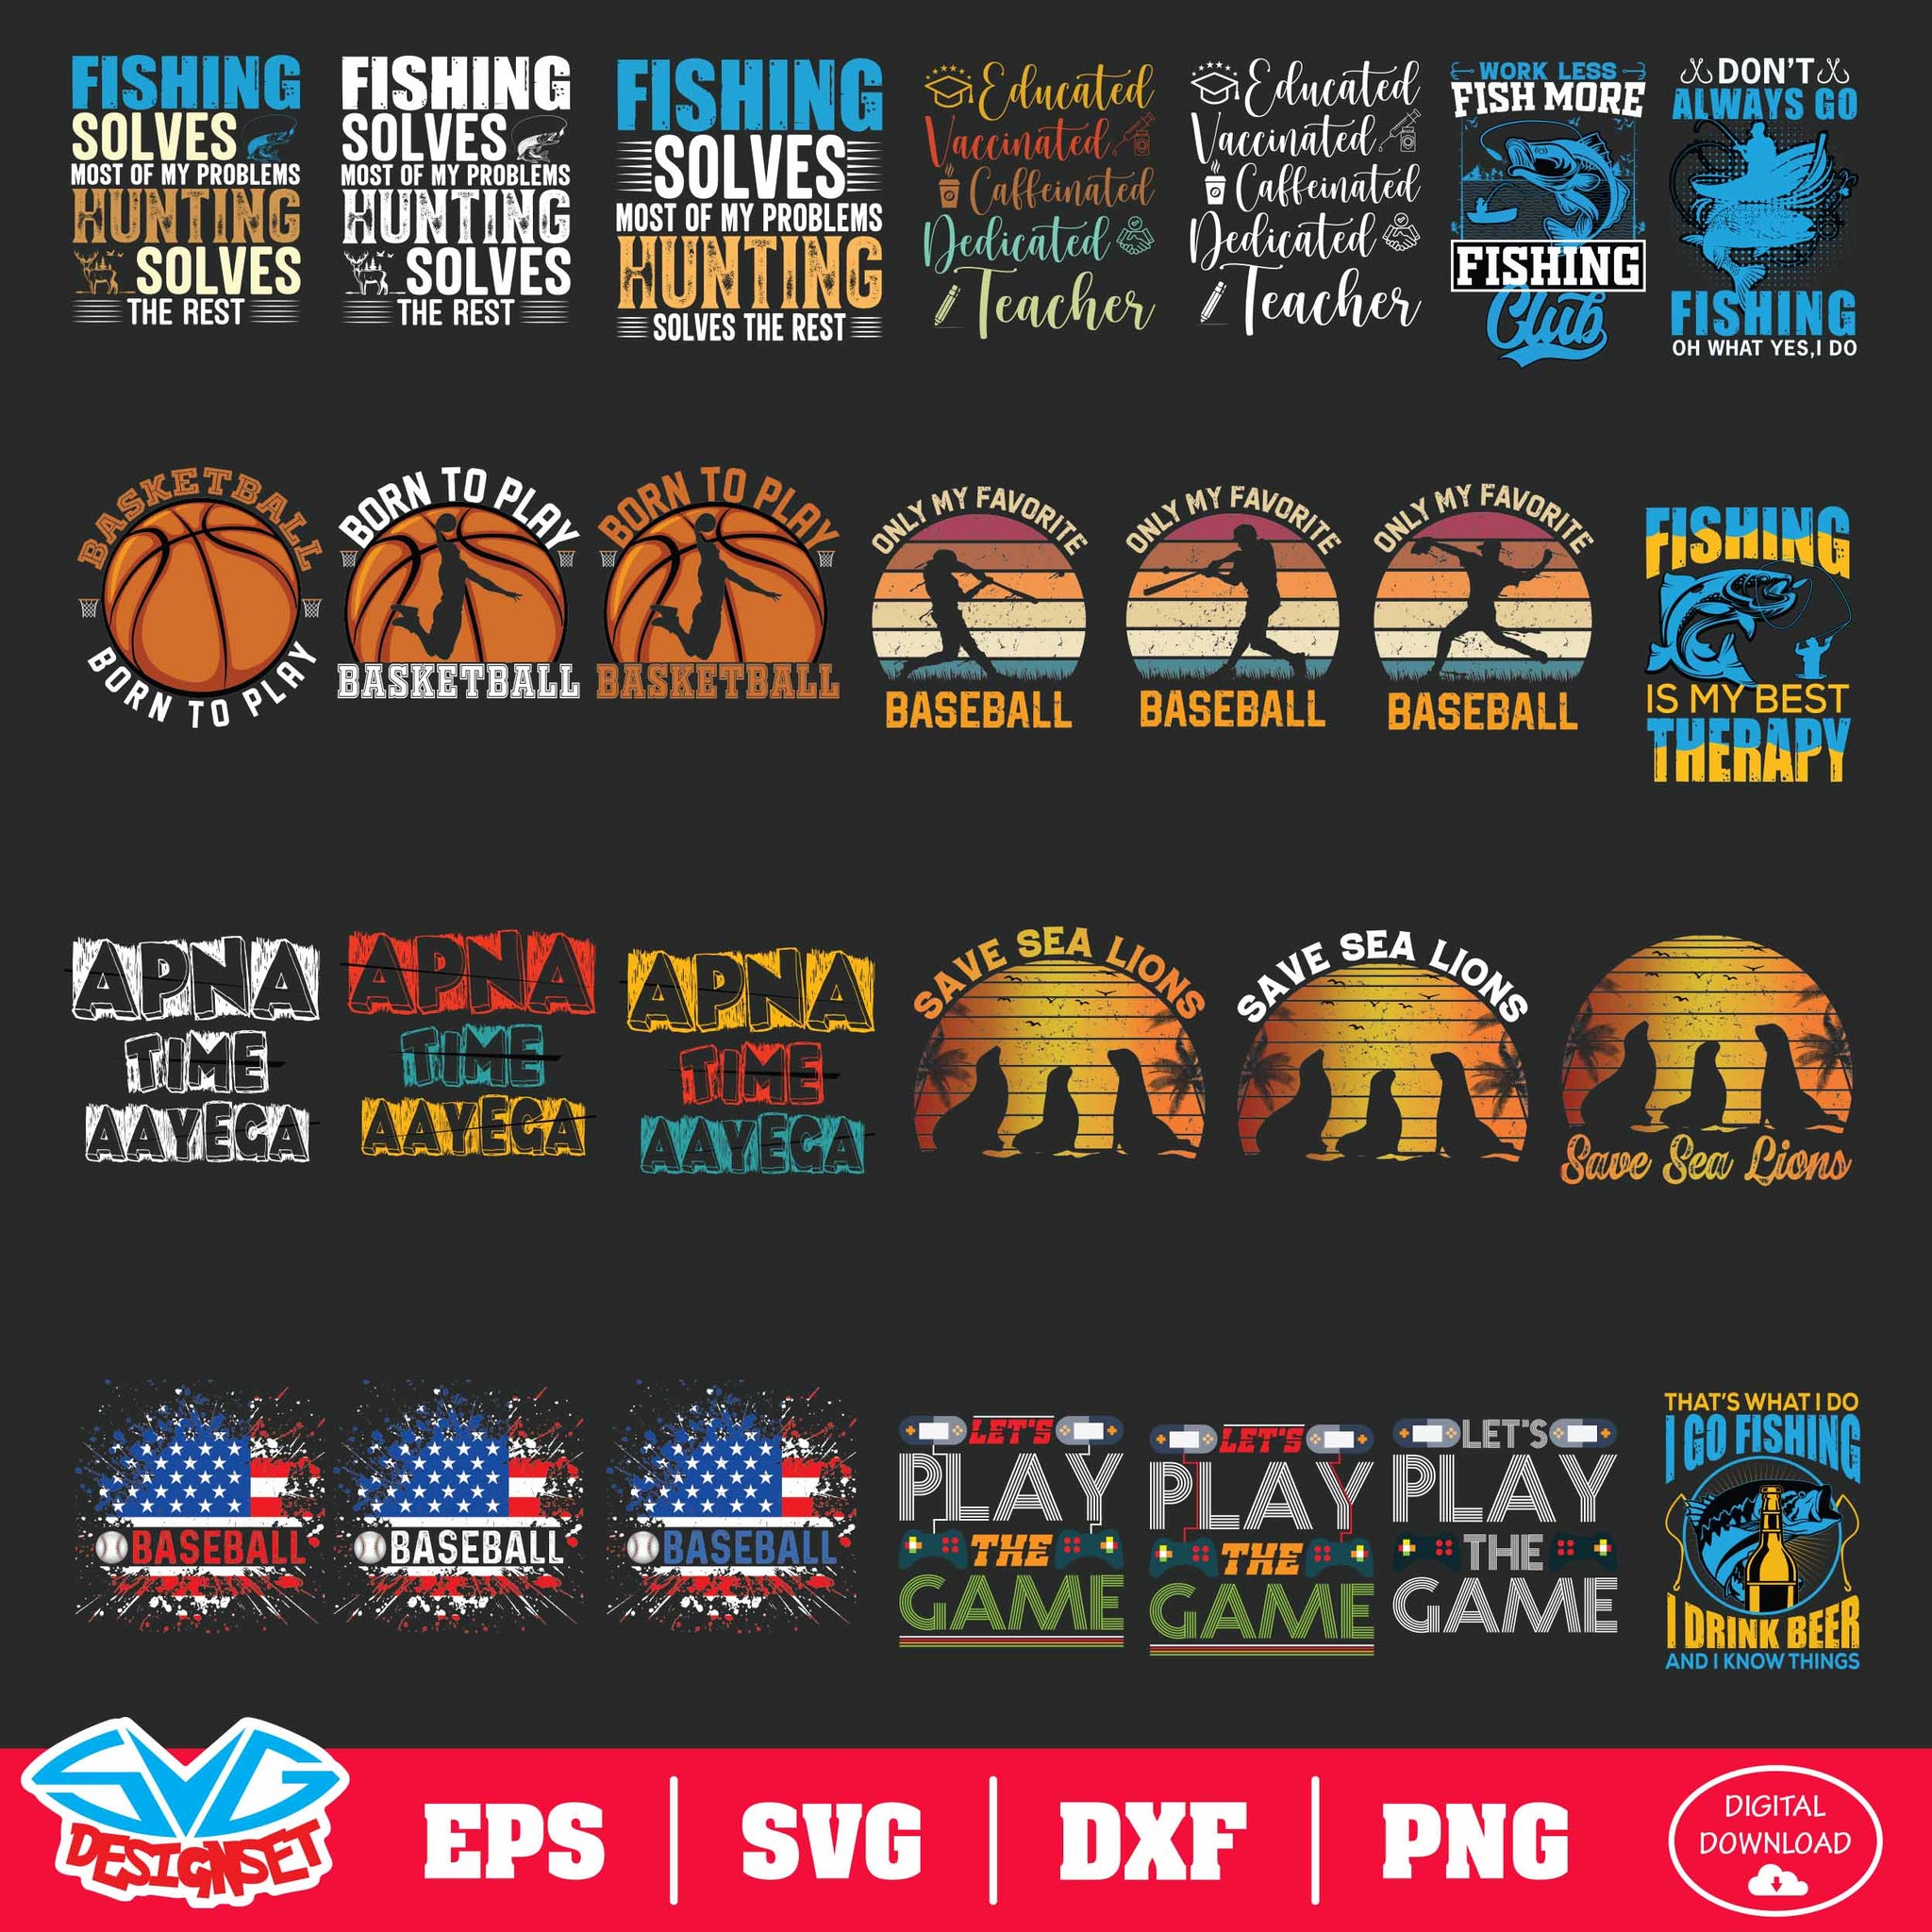 POD Design T-Shirt Svg, Dxf, Eps, Png, Clipart, Silhouette and Cutfiles #9 - SVGDesignSets